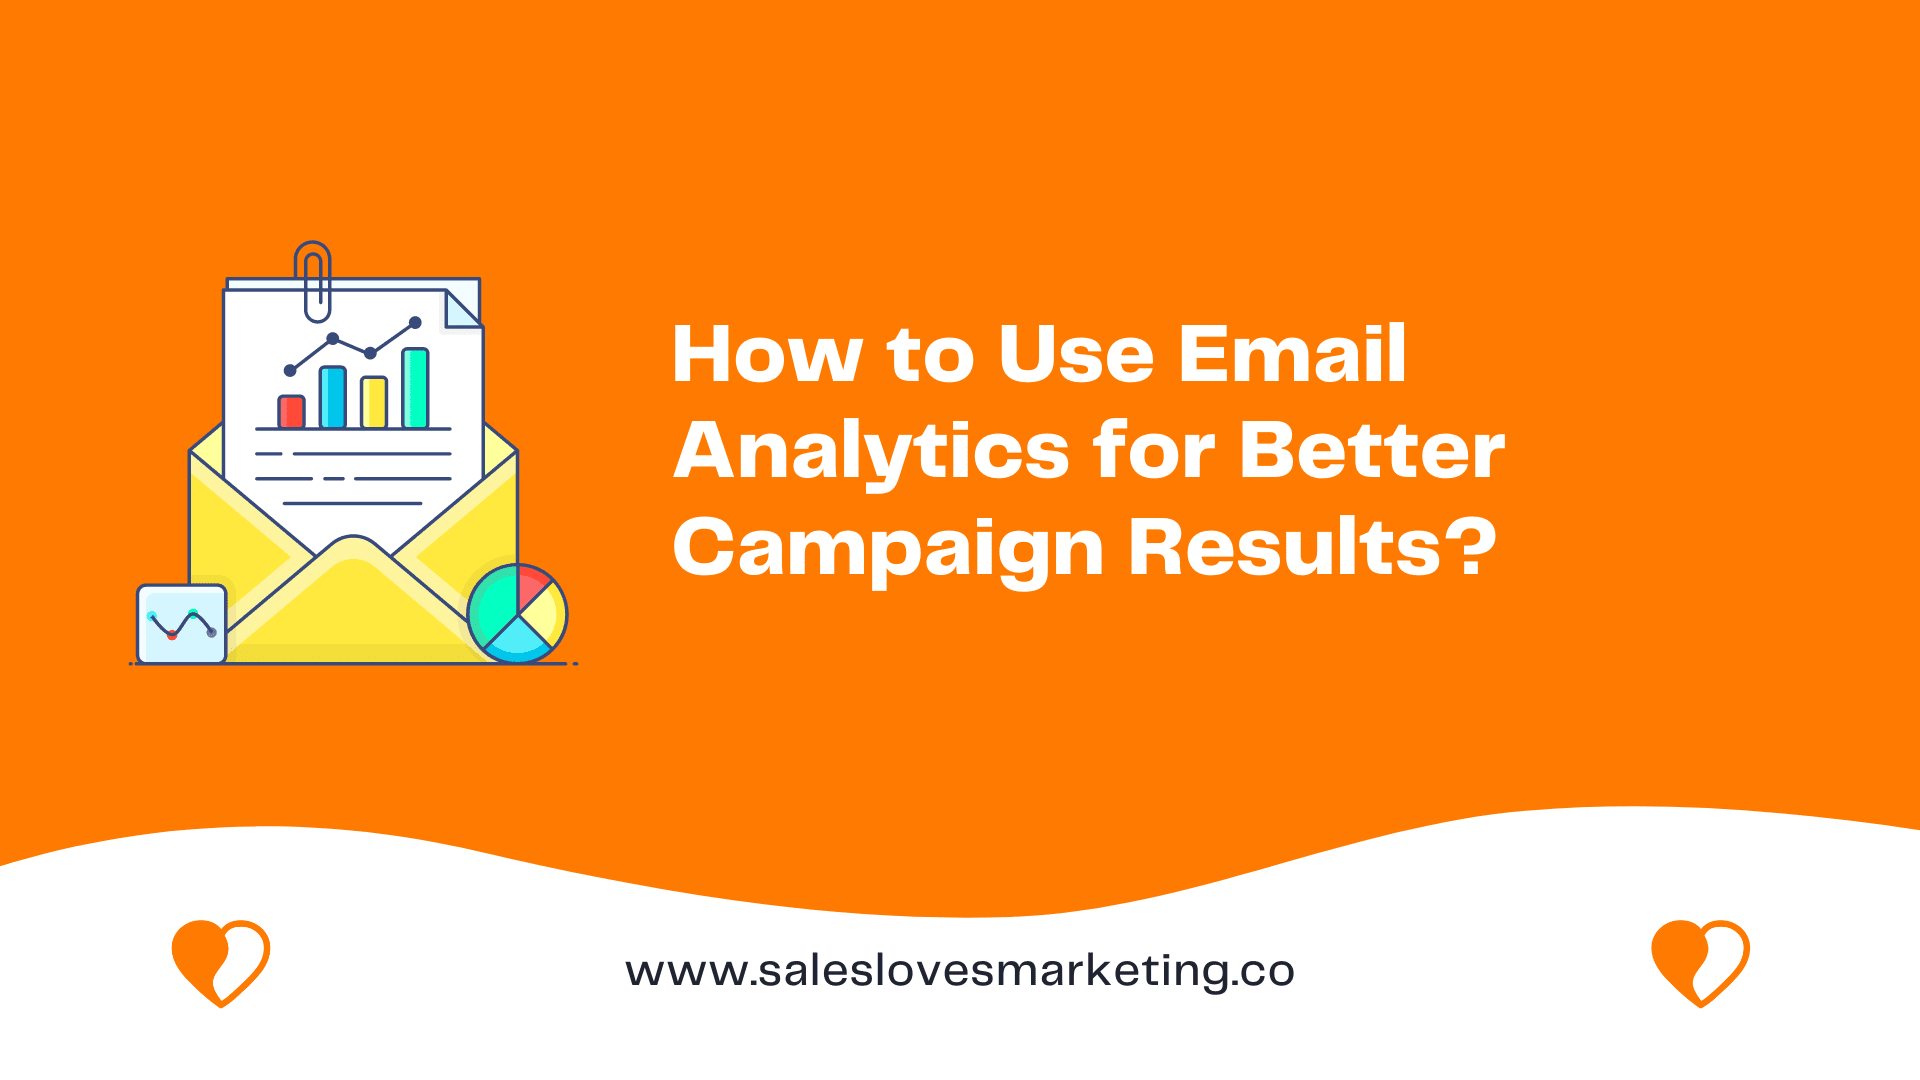 How to Use Email Analytics for Better Campaign Results?